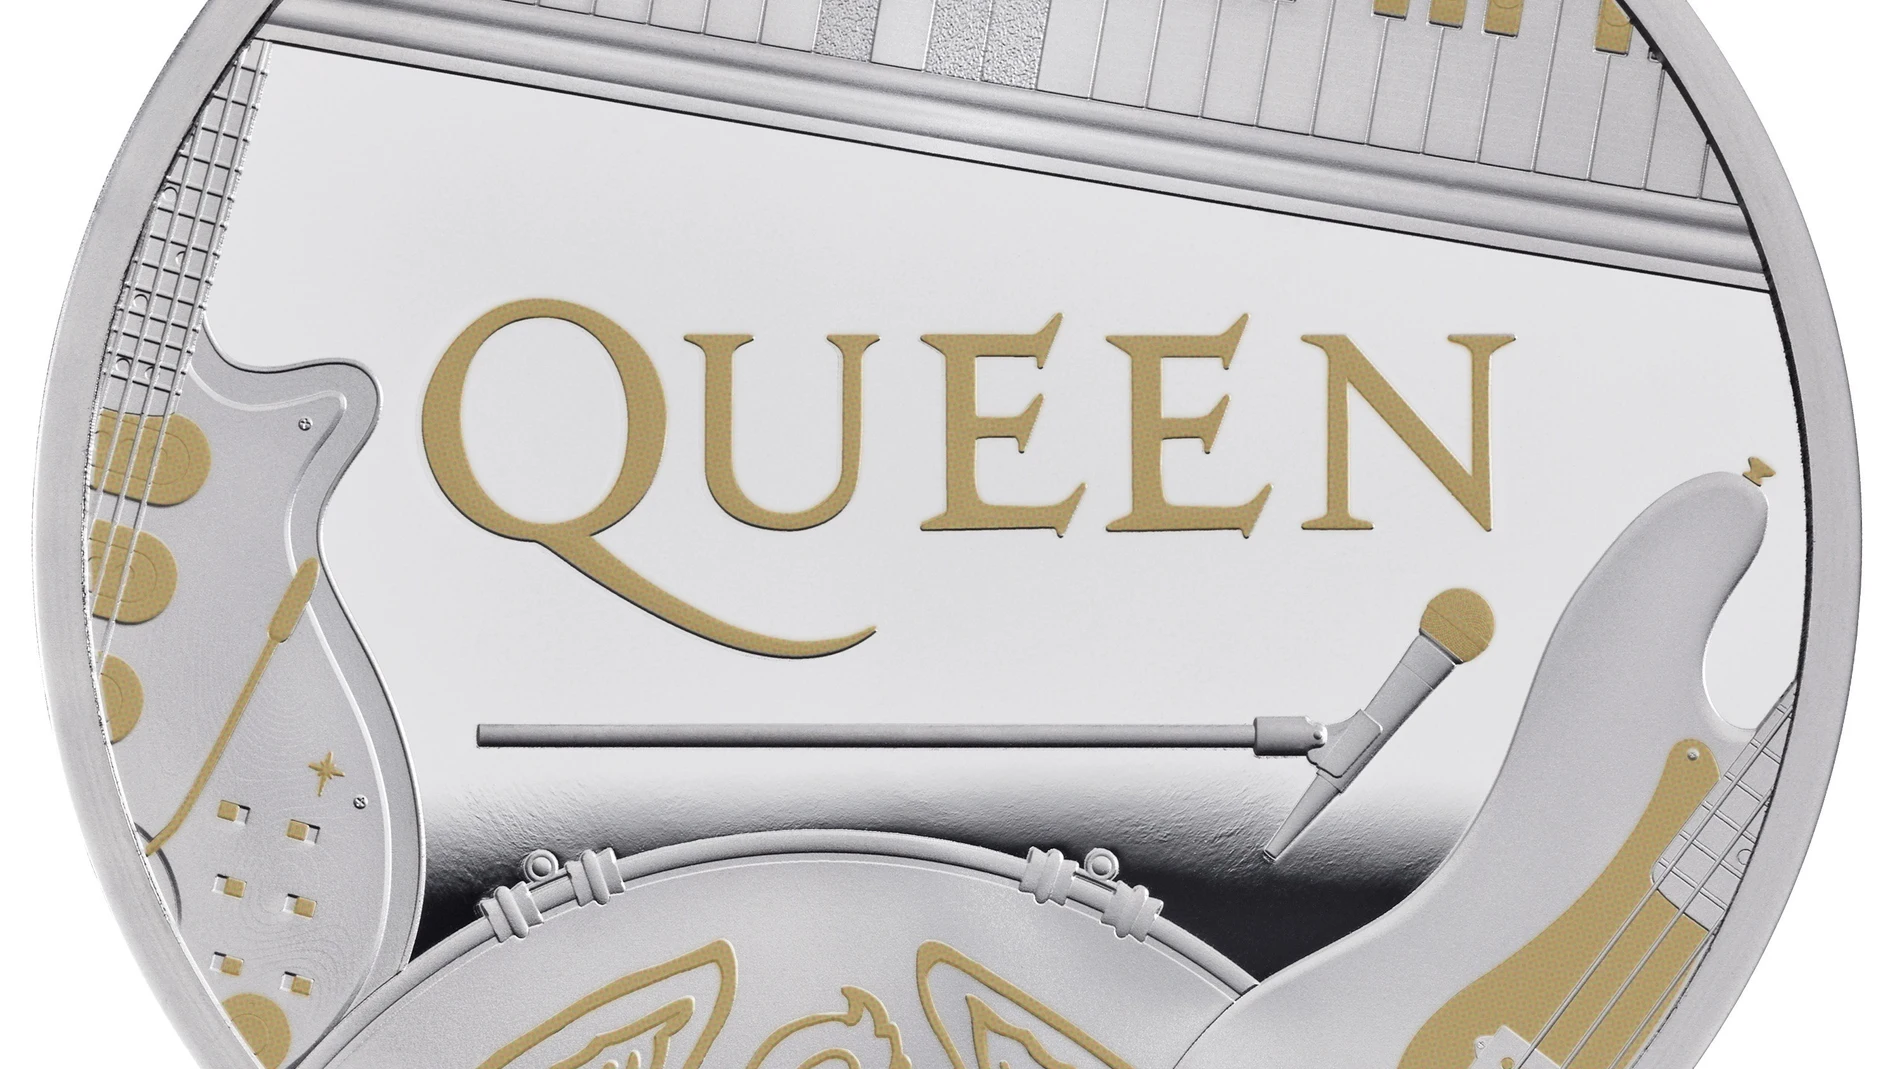 Queen, to be celebrated on UK coin